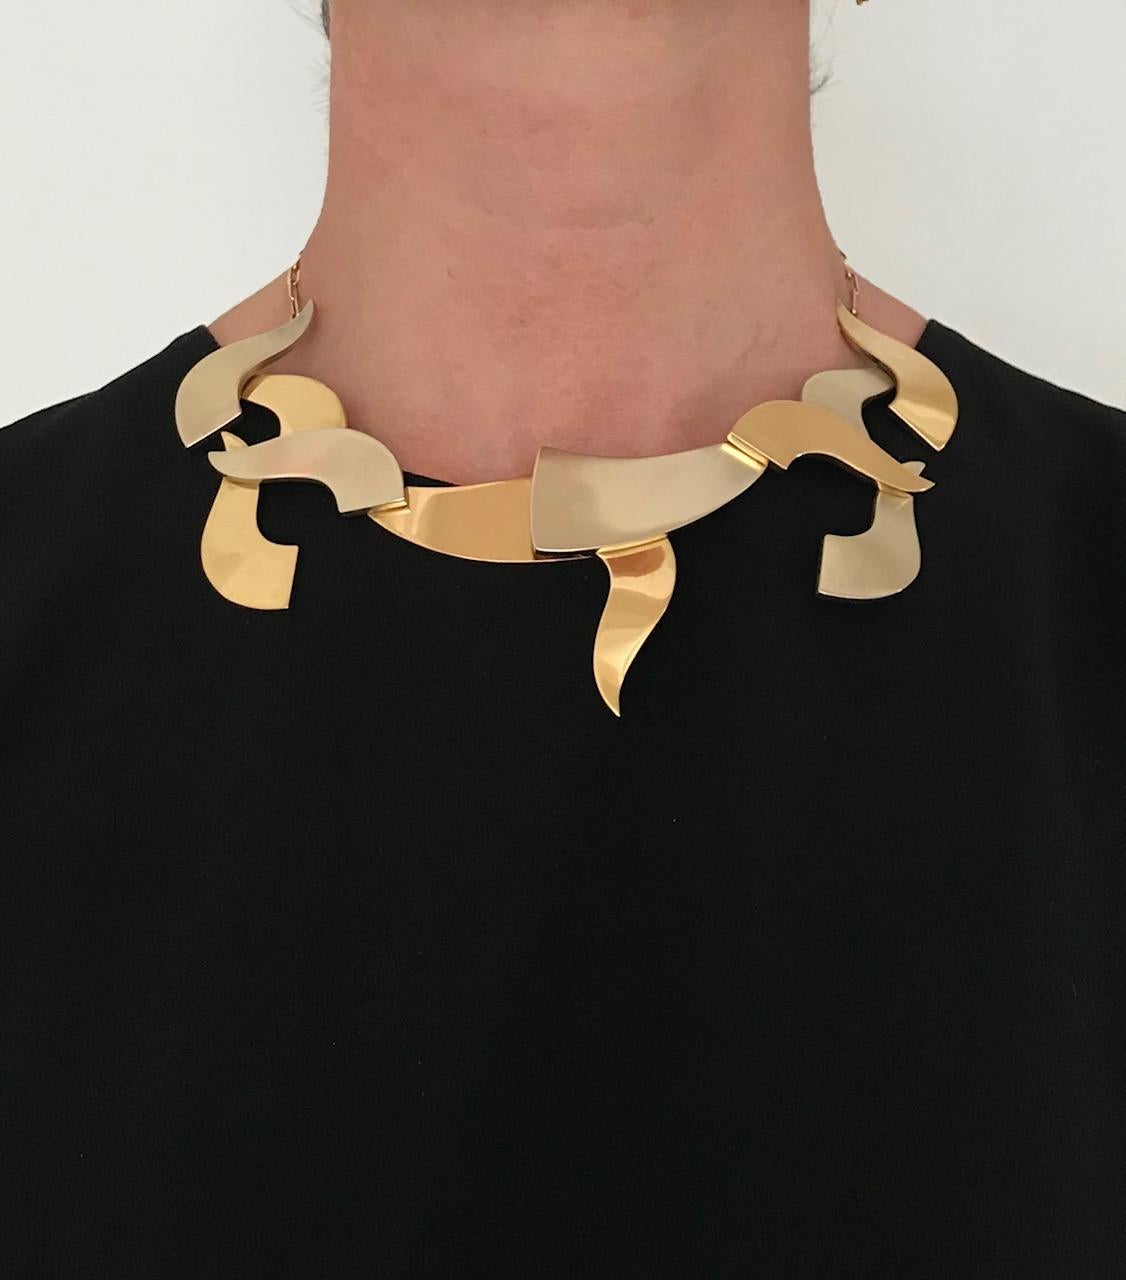 An 18 karat white and yellow gold articulated collar, by Hans Richter was made in 1967.

This sculptural necklace is marked Hans Richter, 67, no. 5/9. A necklace of this design was exhibited in Jewelry as Sculpture as Jewelry, at the Institute of